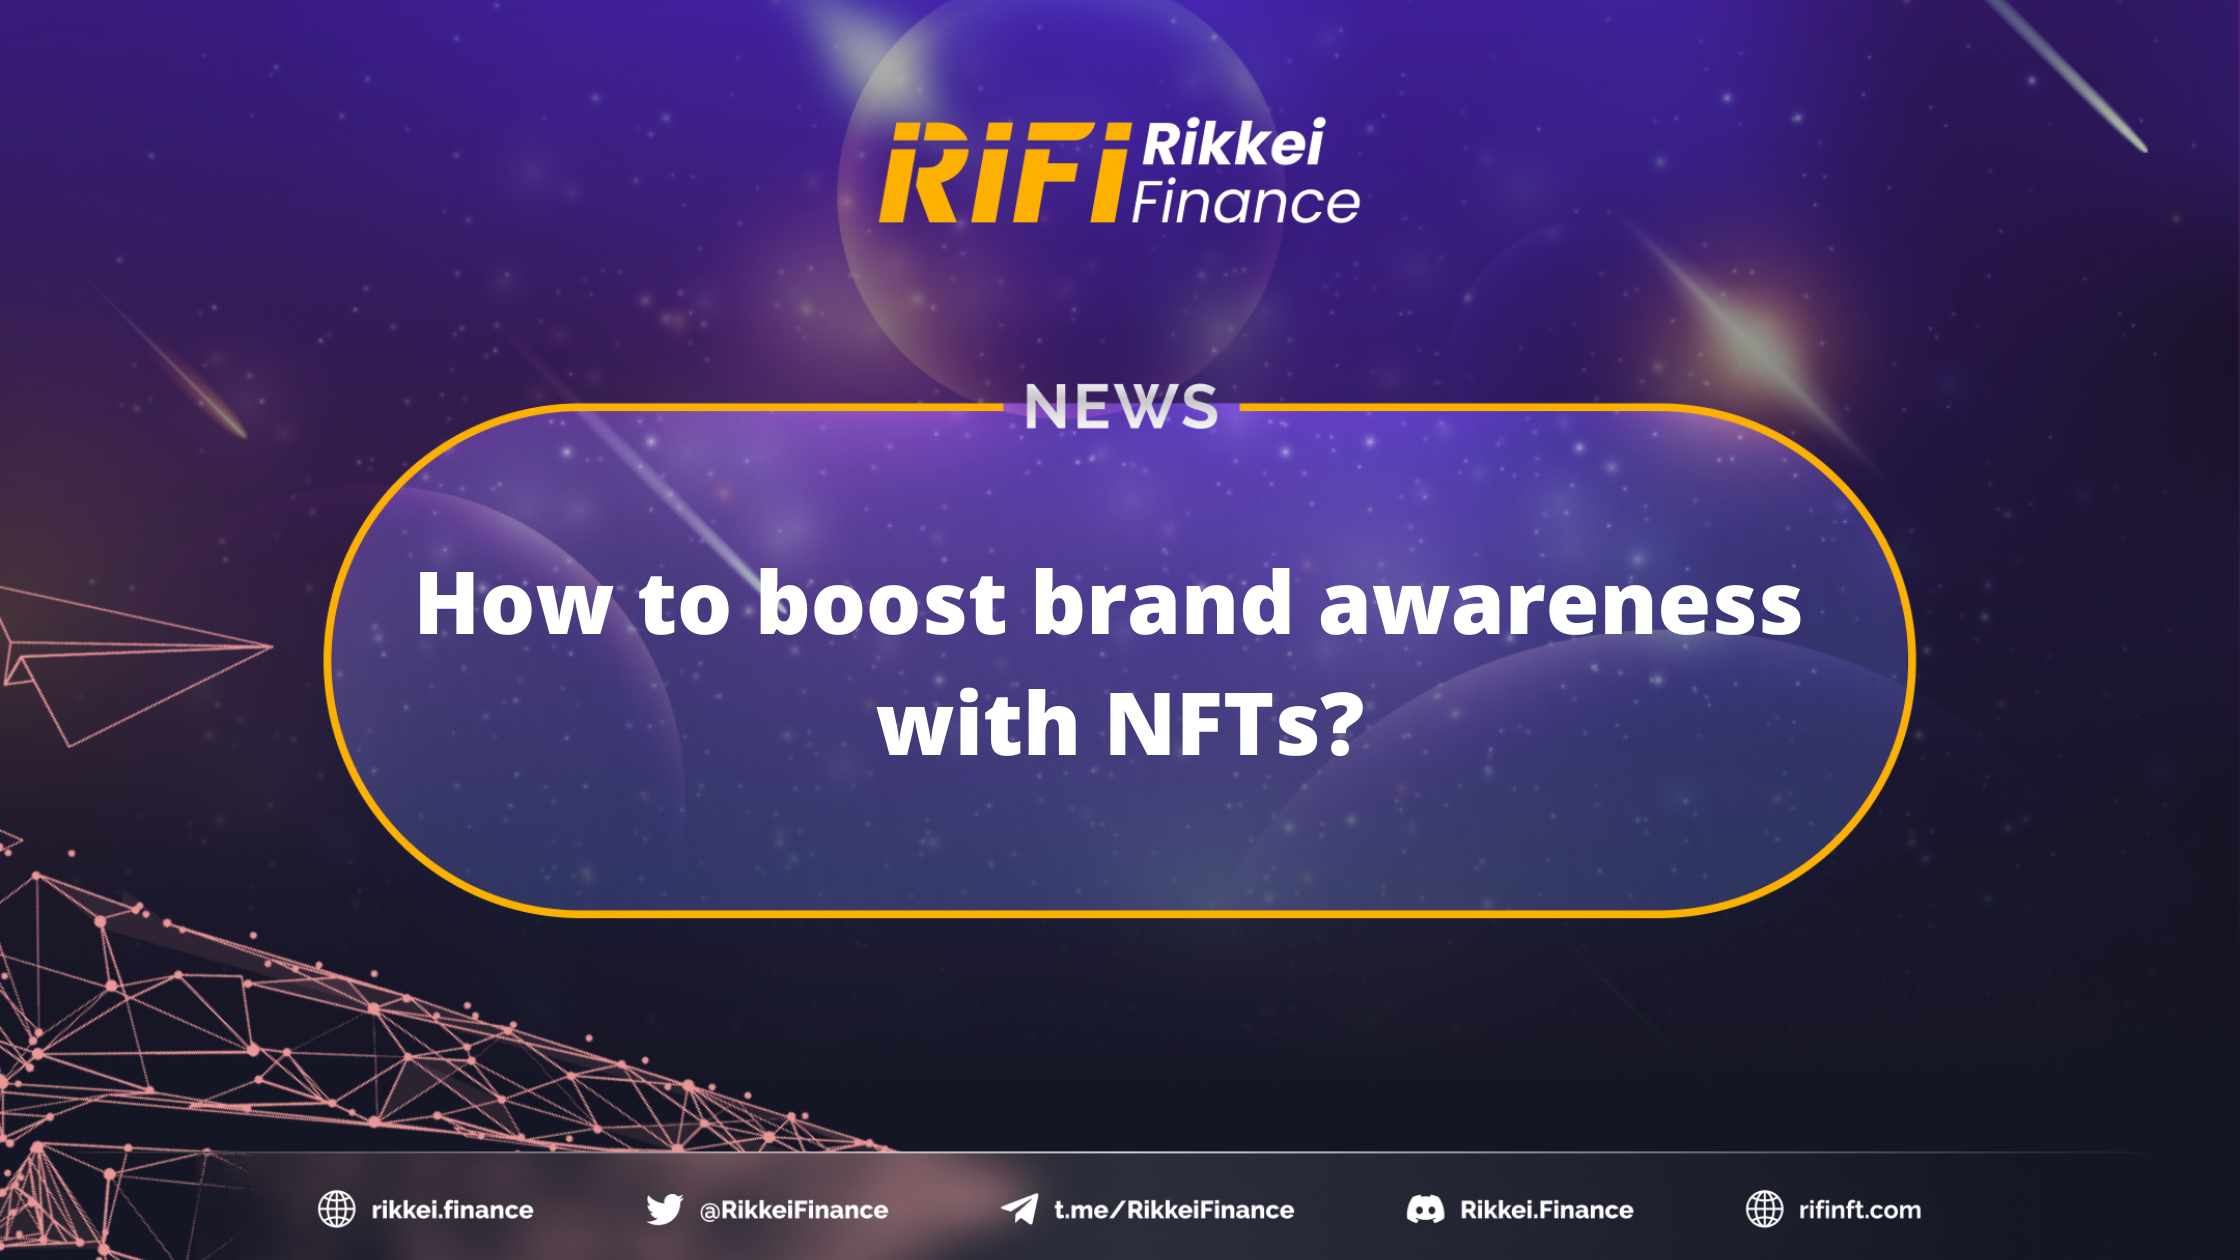 How to boost brand awareness with NFTs